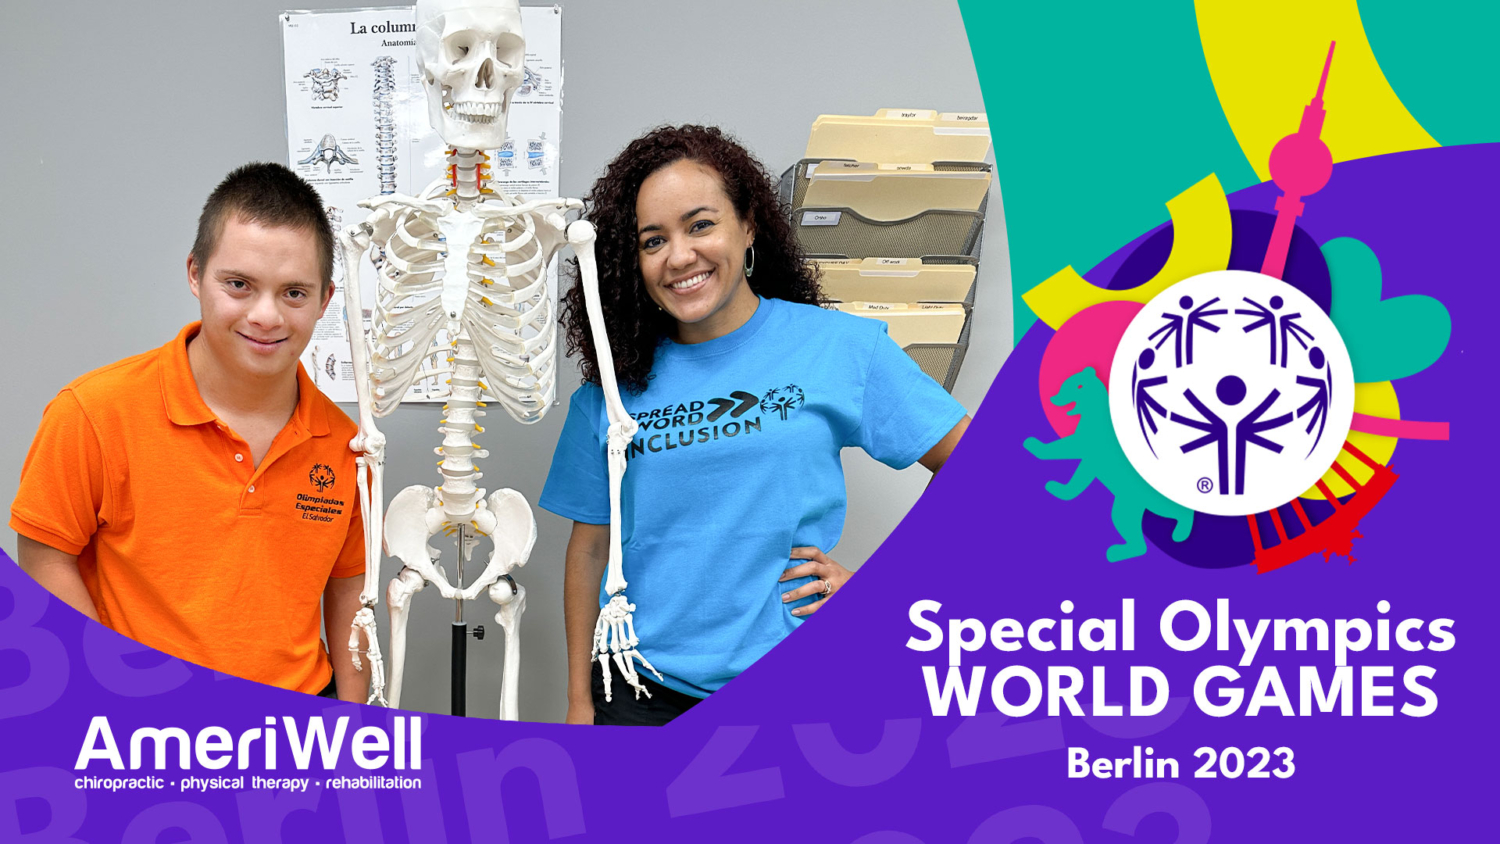 AmeriWell Clinics supports the athletes of Special Olympics El Salvador on their journey to greatness at the Special Olympics World Games Berlin 2023.